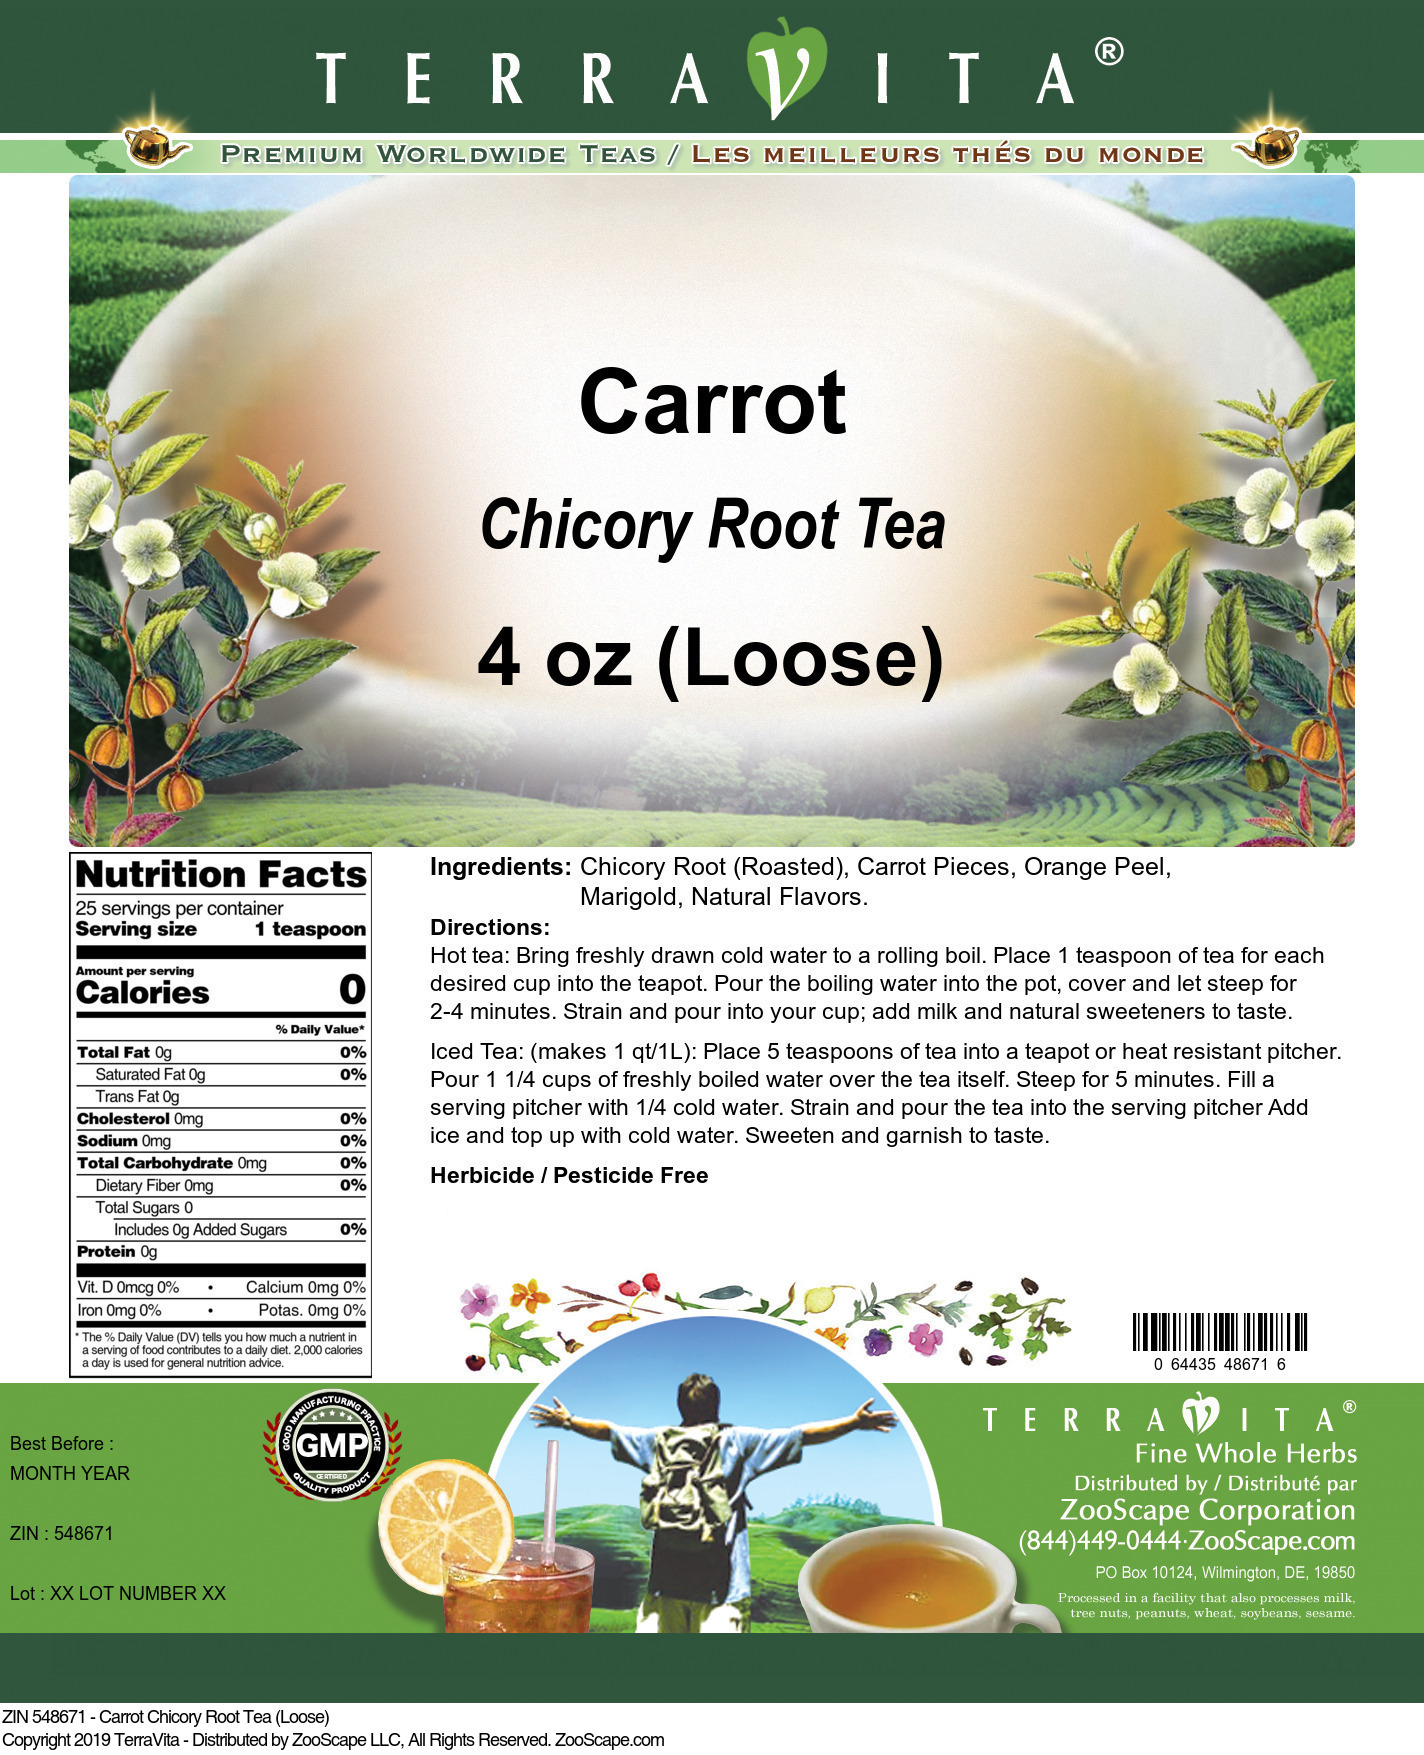 Carrot Chicory Root Tea (Loose) - Label